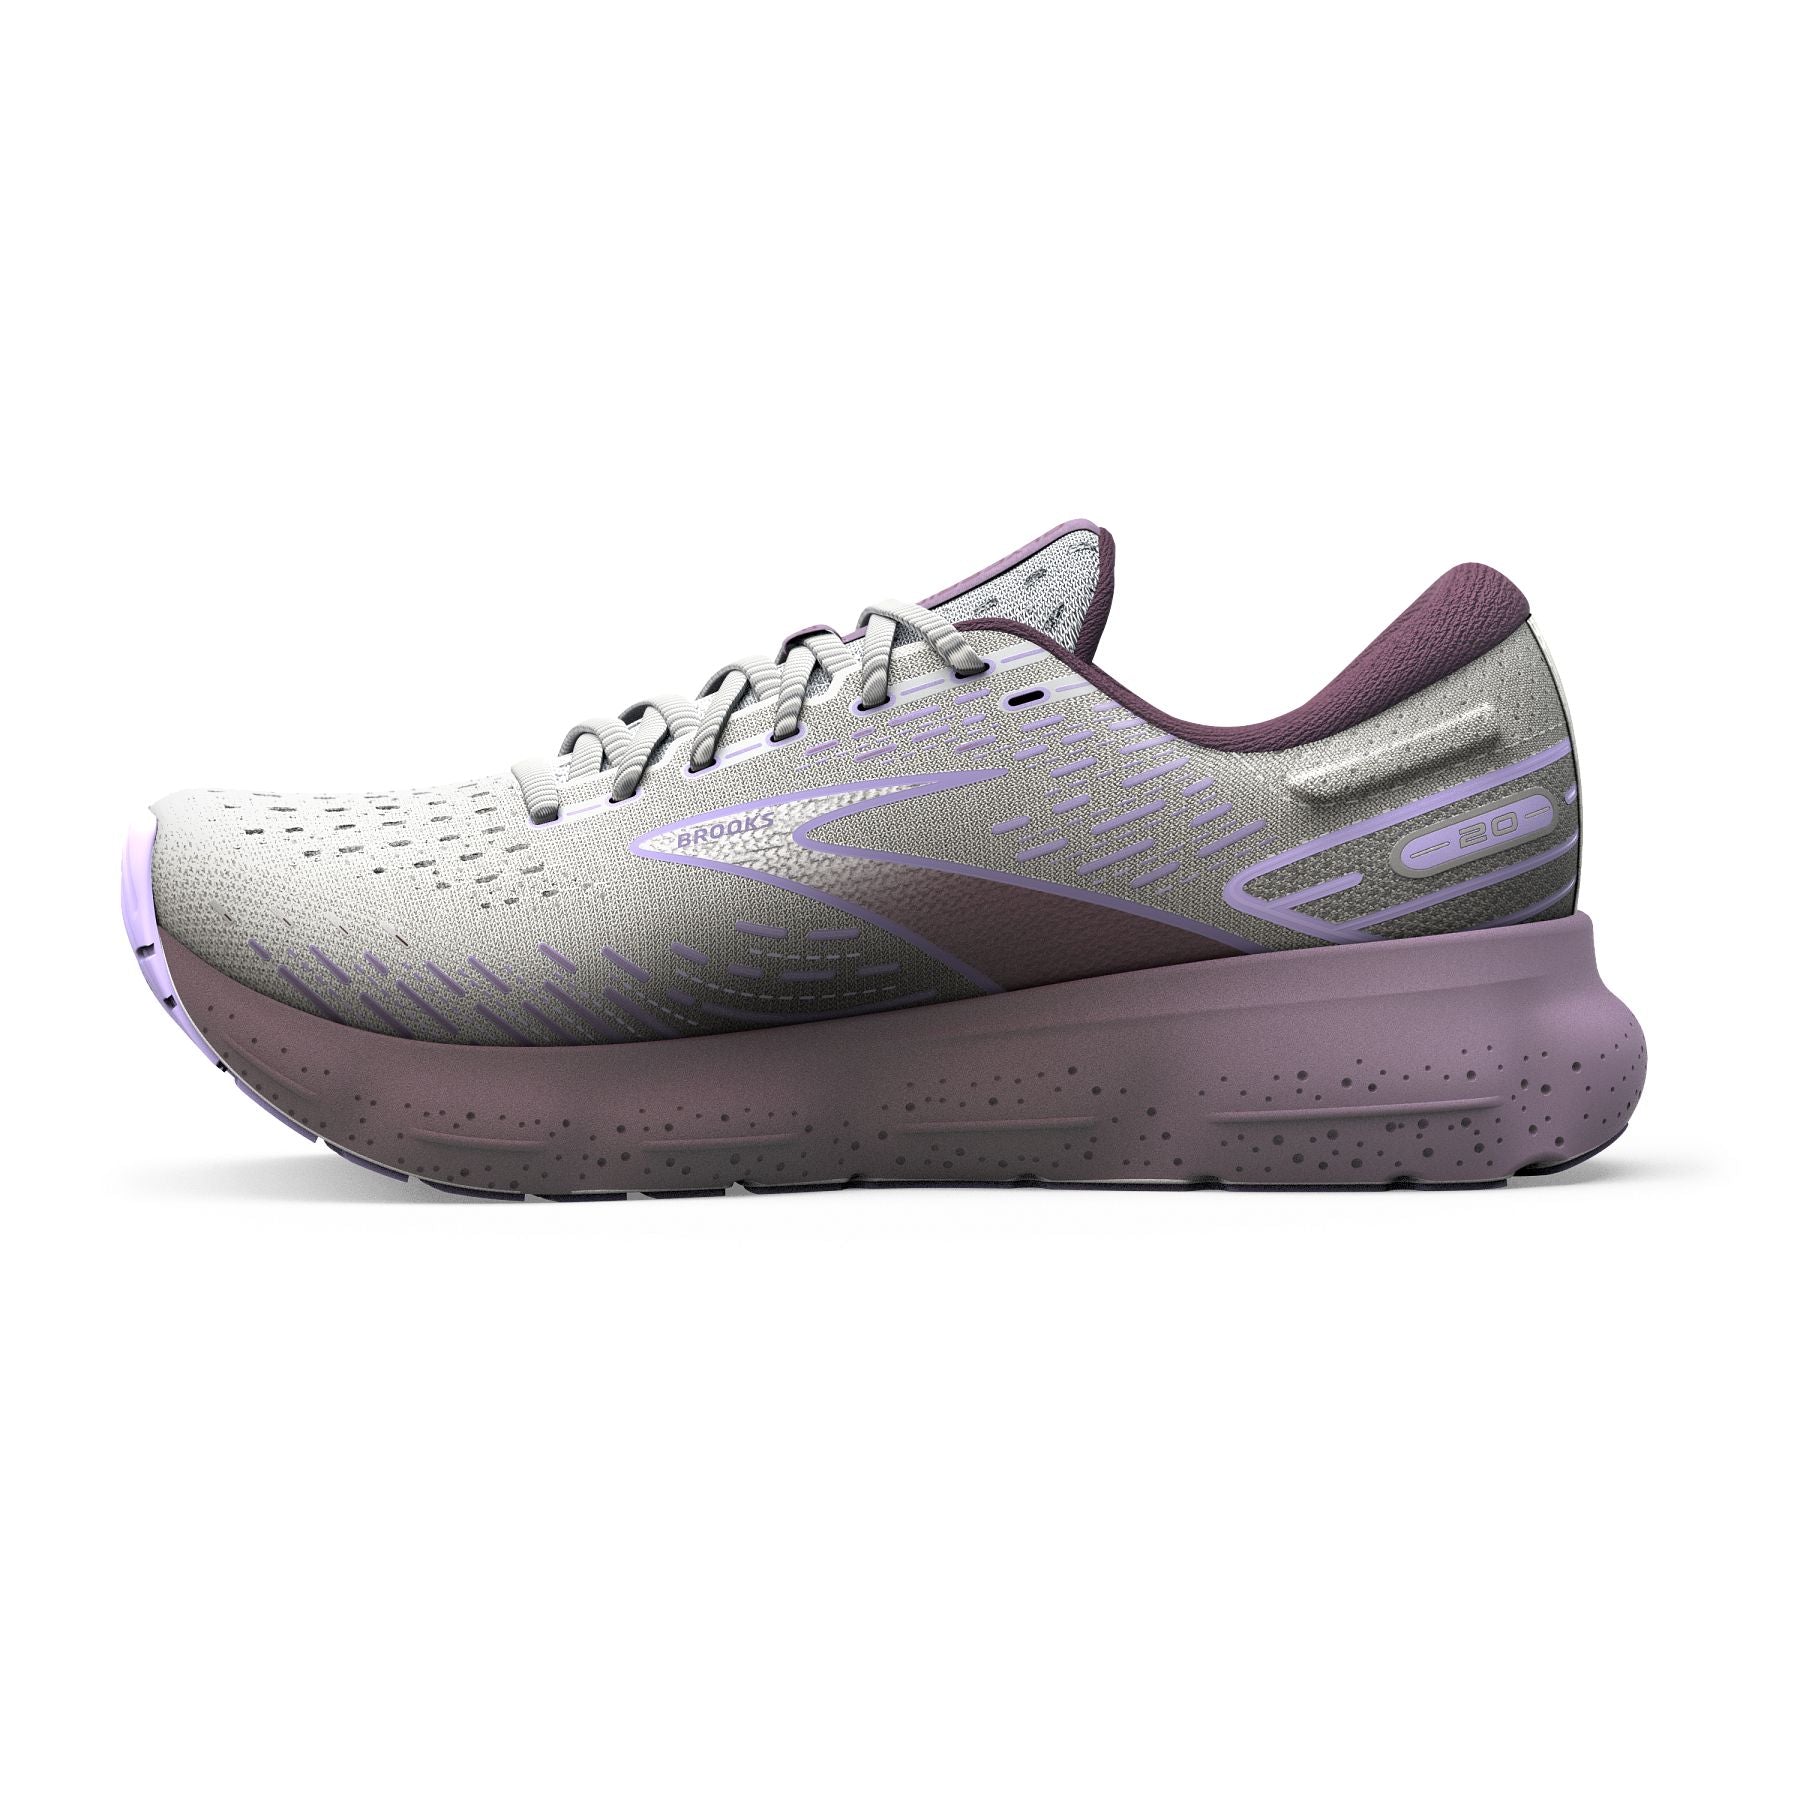 Medial view of the Women's Glycerin 20 by Brooks in the color White/Orchid Lavender